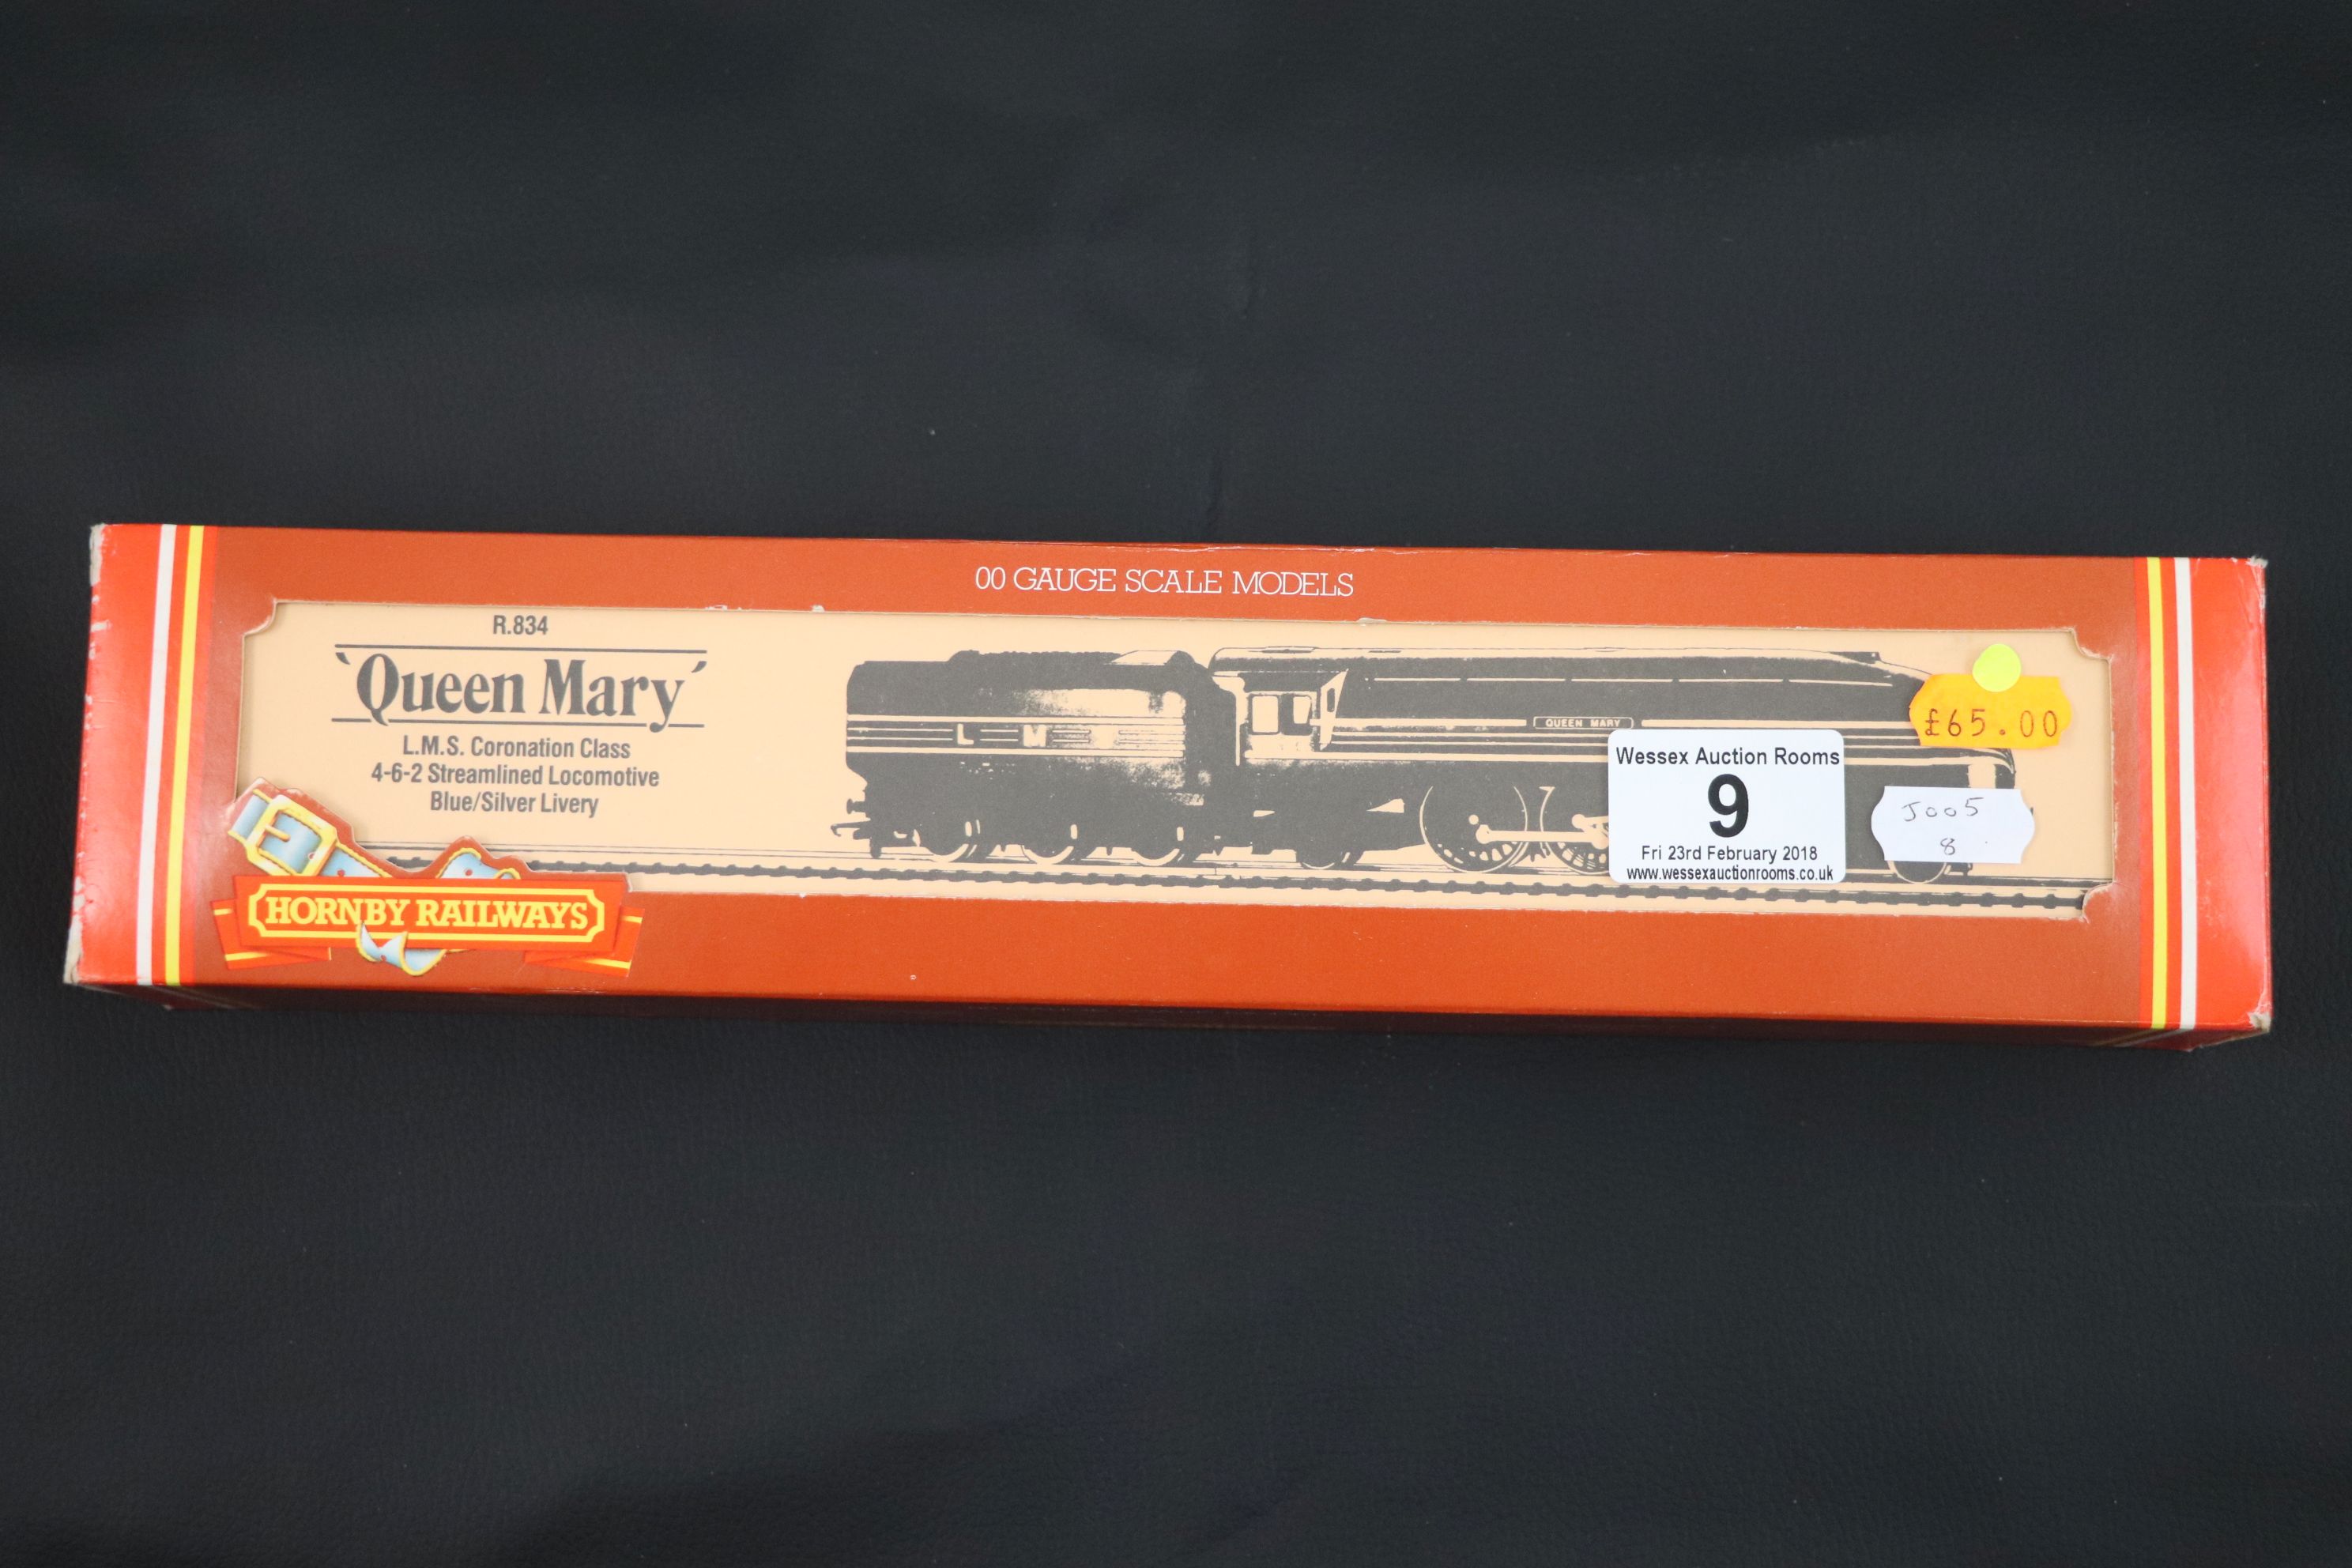 Boxed Hornby OO gauge R834 Queen Mary LMS Coronation Class 4-6-2 Streamlined Locomotive blue/